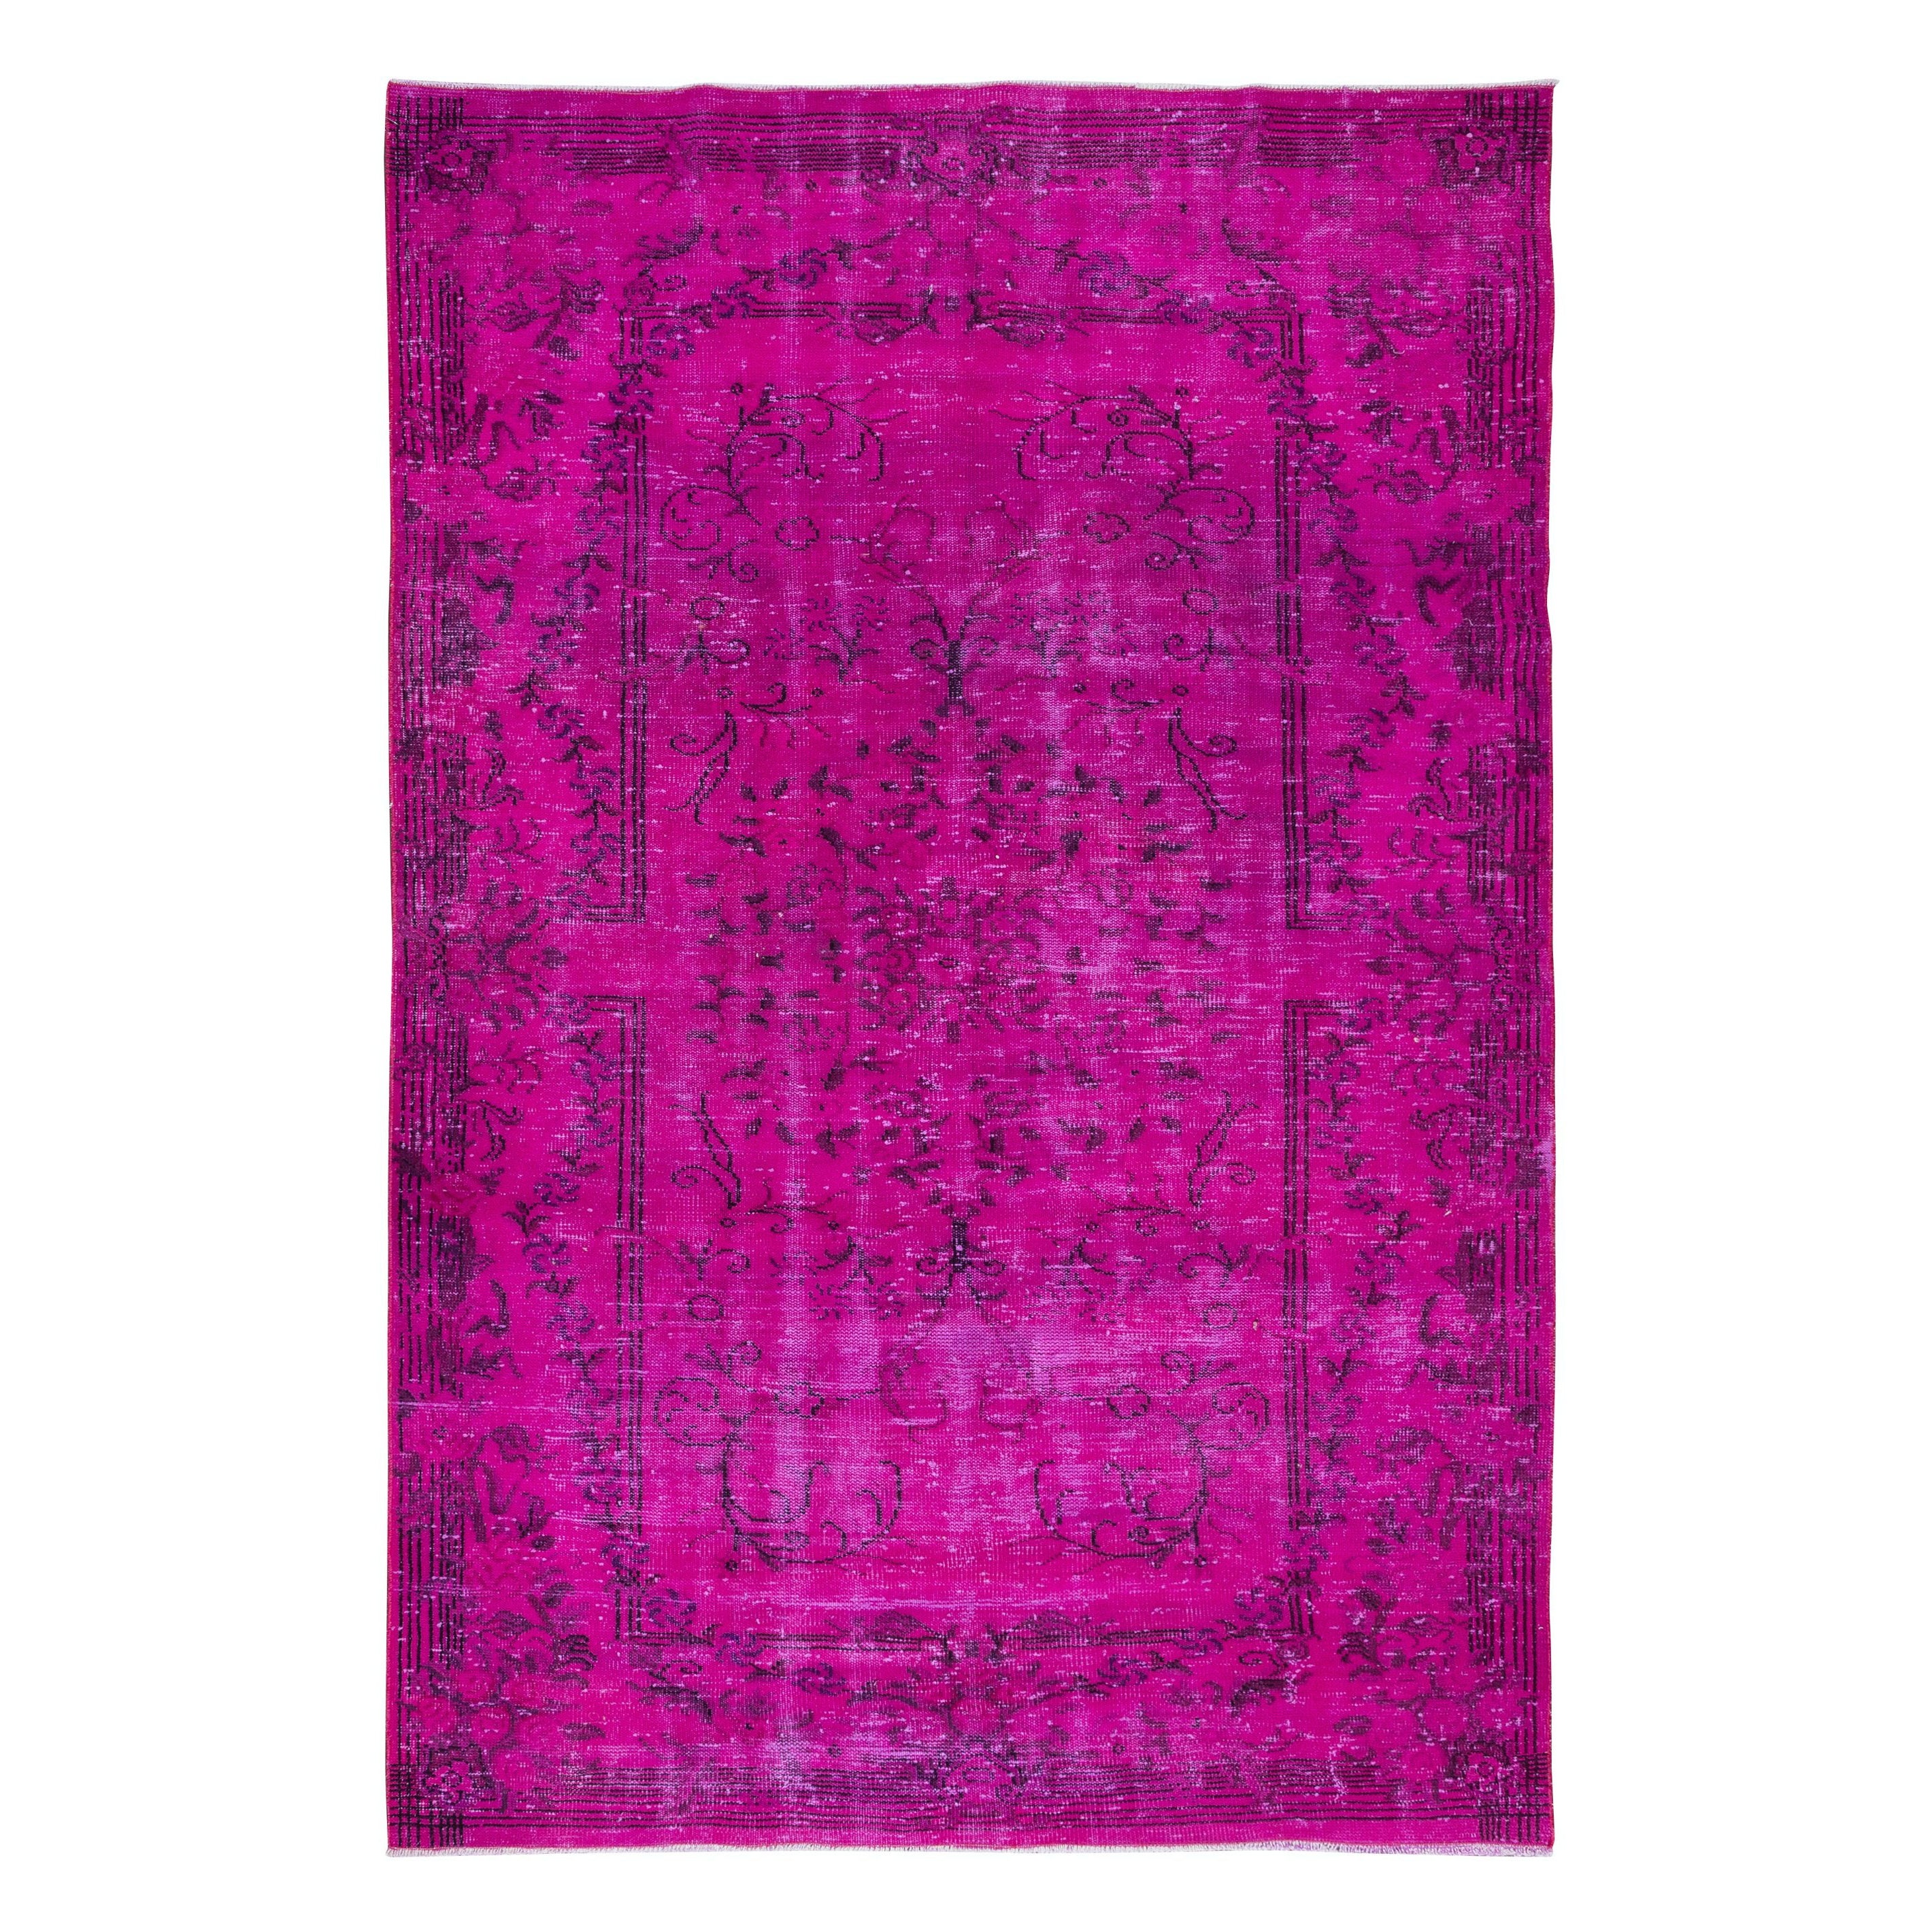 5.7x9 Ft Decorative Pink Area Rug for Modern Interiors, Handknotted in Turkey For Sale